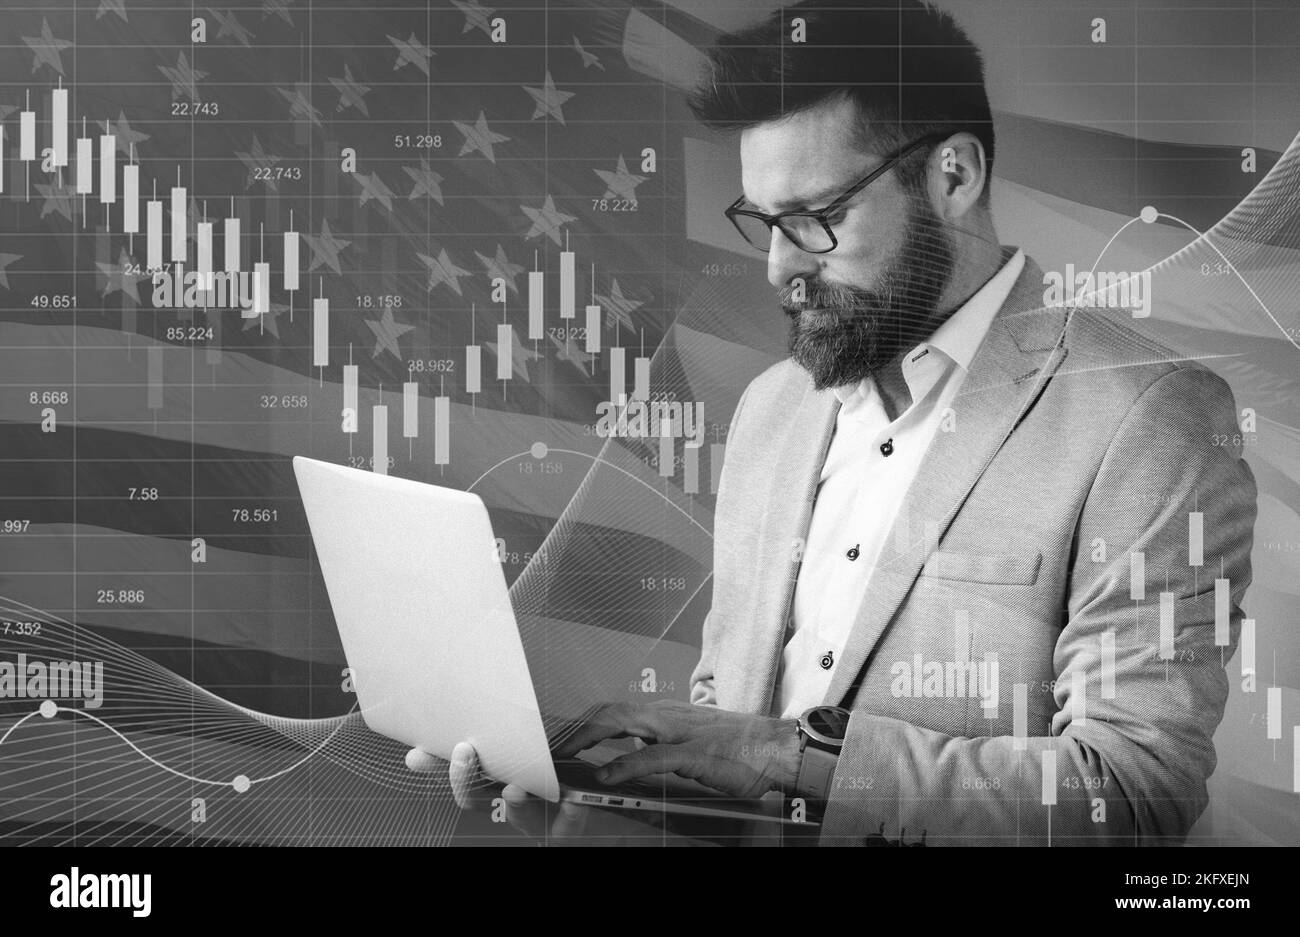 young busuness man using laptop, USA flag background, business man investor Stock Photo